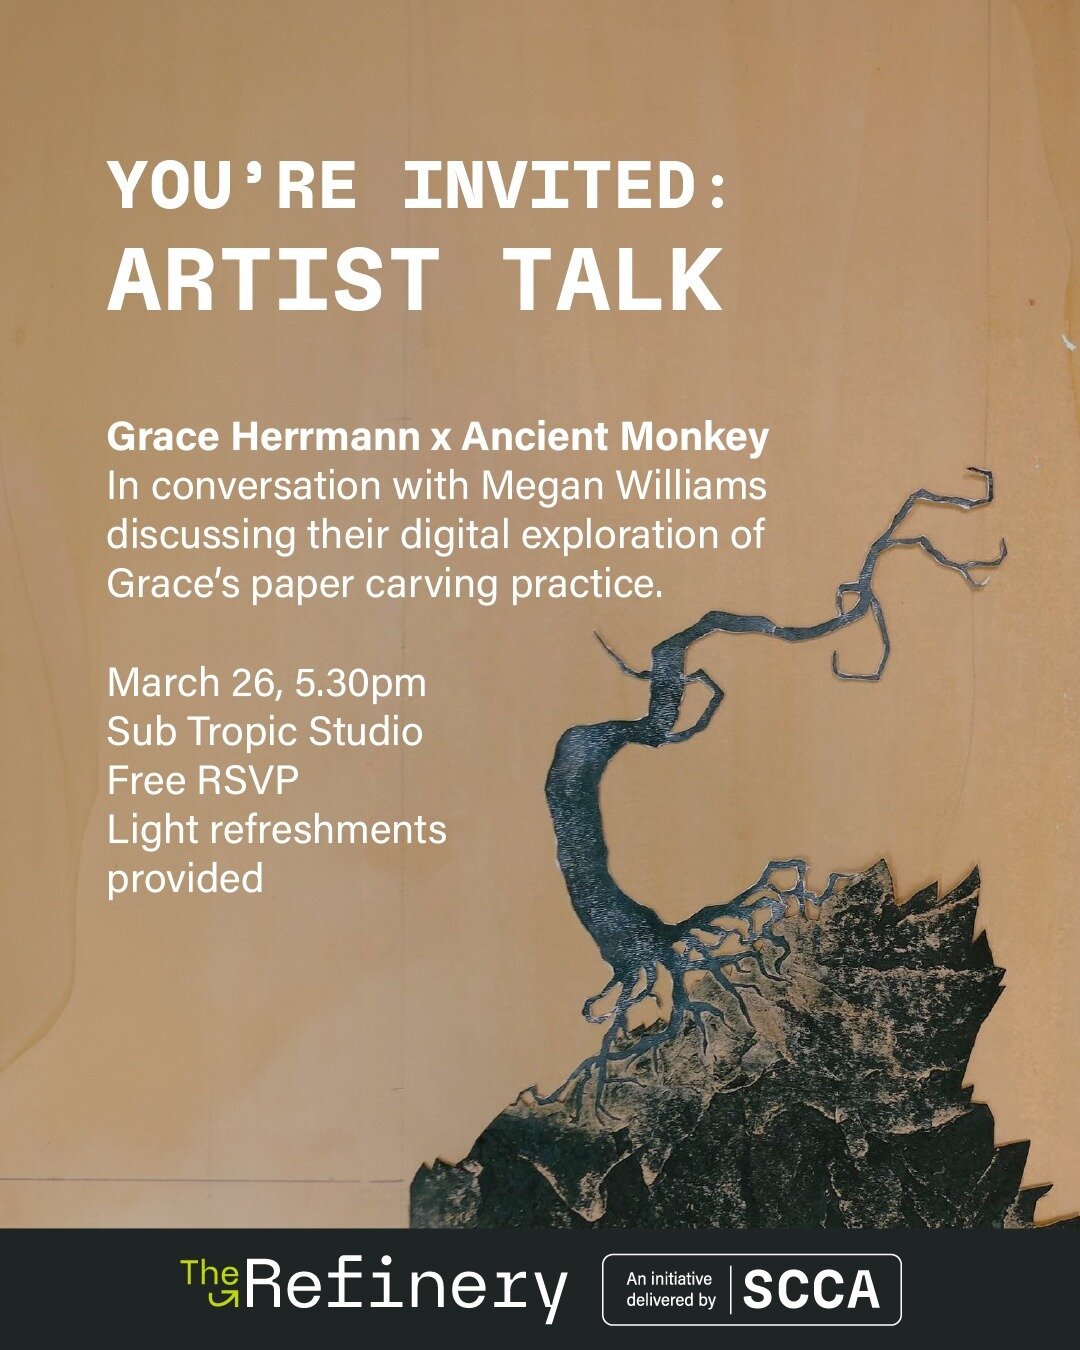 Artist Talk: You&rsquo;re invited!

@graceherrmannart x @ancient_monkey 

In conversation with Megan Williams discussing their digital exploration of Grace&rsquo;s paper carving practice.

March 26, 5.30pm
5:30pm
Free RSVP
Light refreshments provided